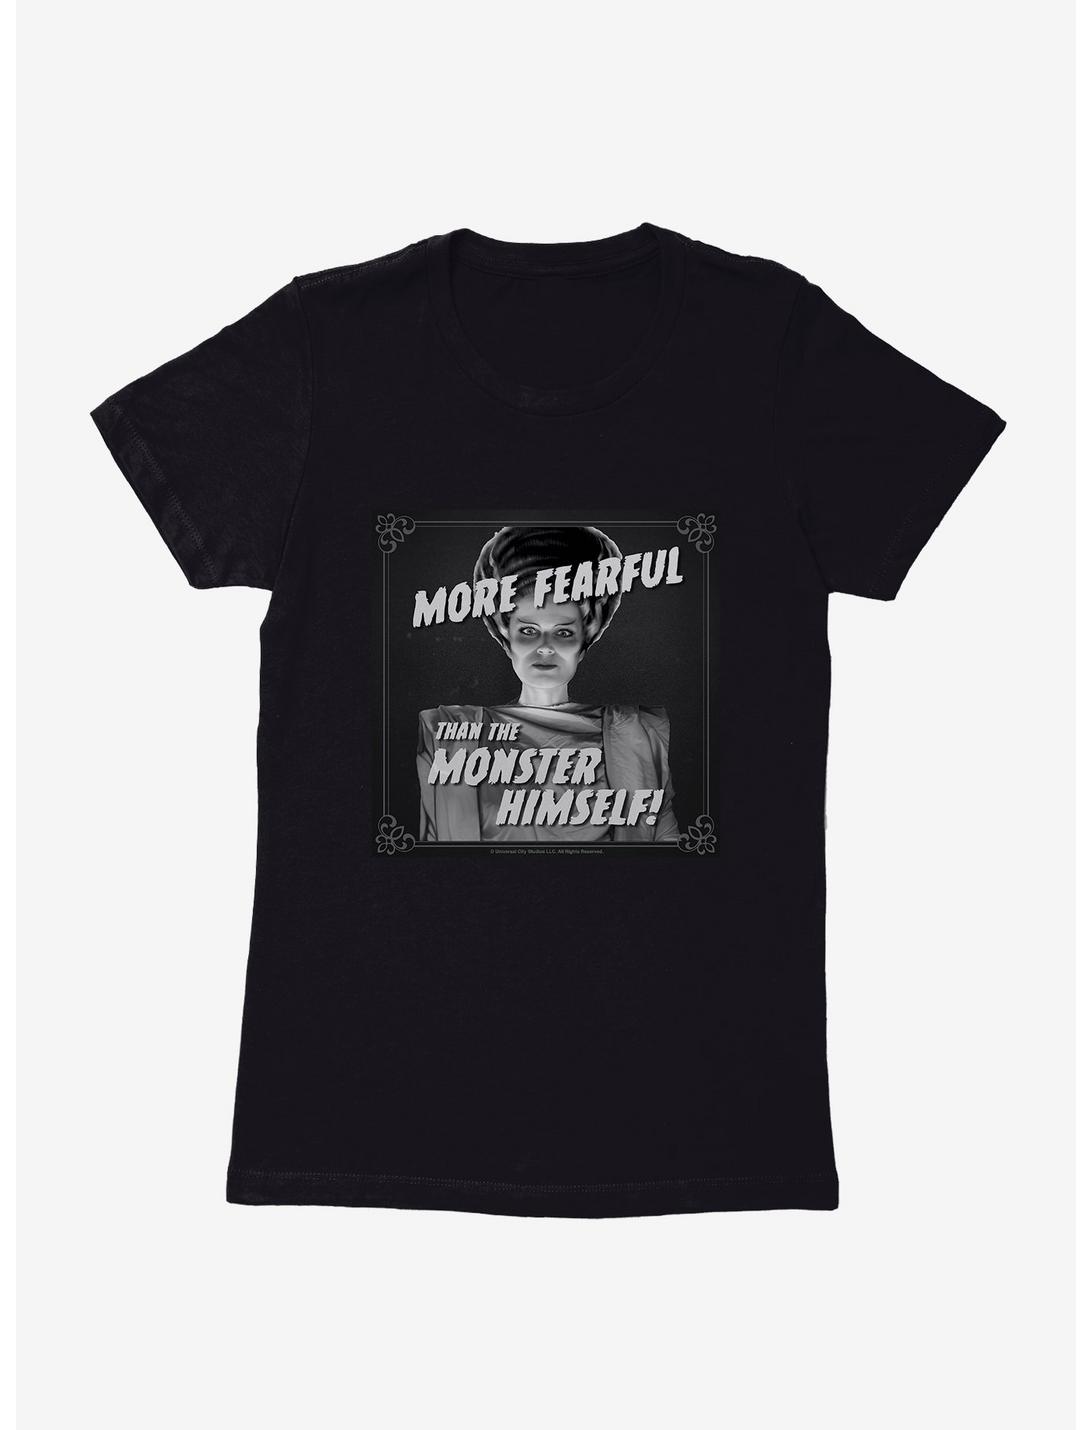 Universal Monsters Bride Of Frankenstein More Fearful Womens T-Shirt, BLACK, hi-res